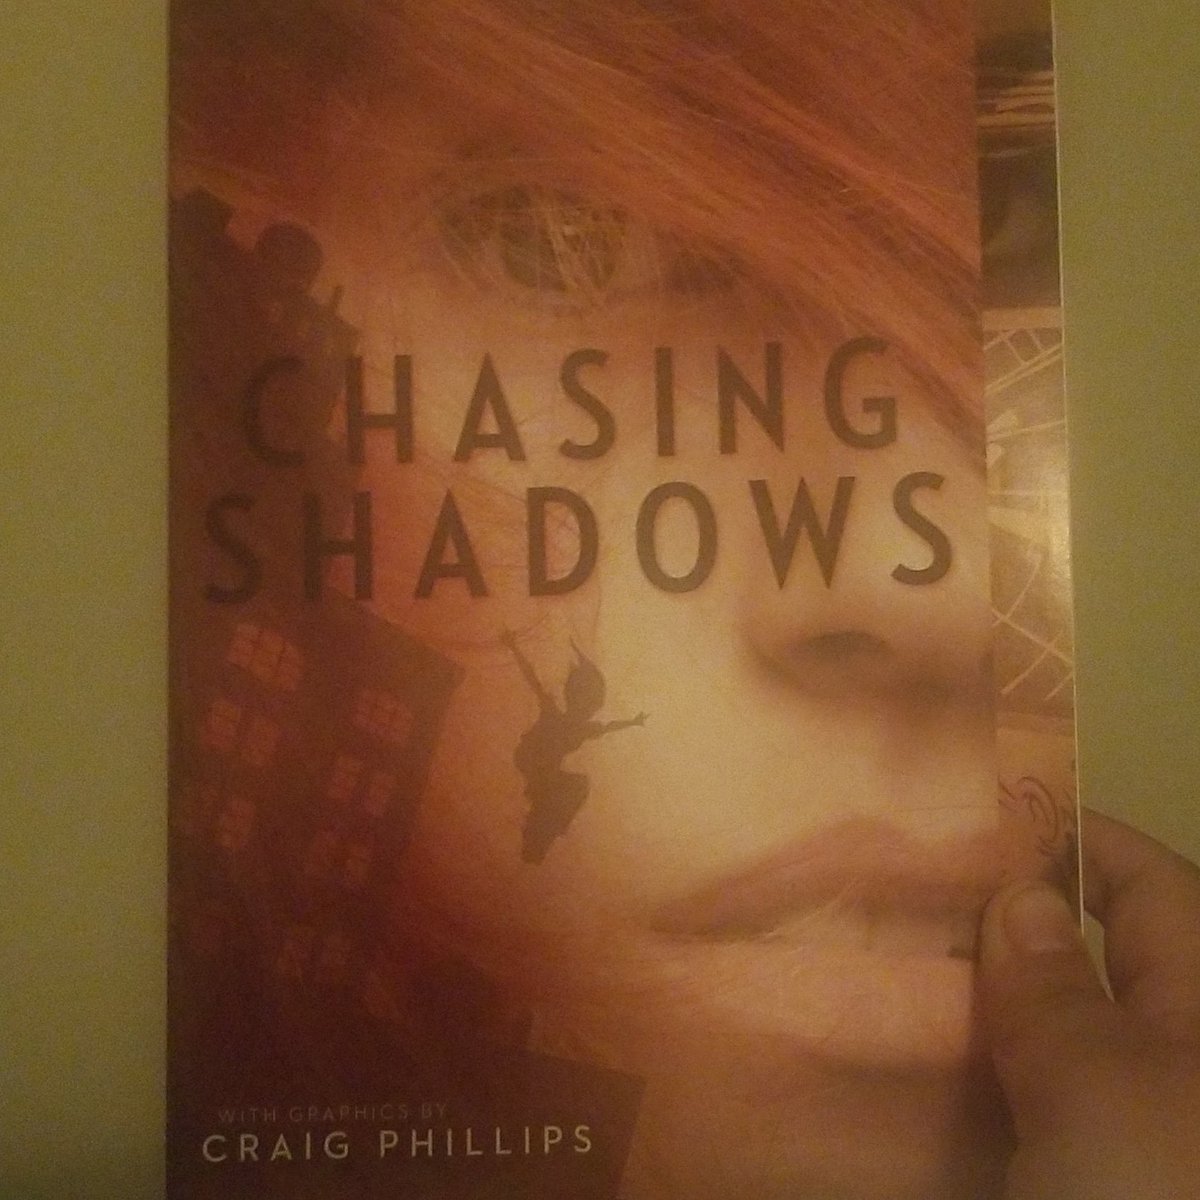 Day 10 of  #APAHM   reads: CHASING SHADOWS by  @SwatiAvasthi. If you can't decide between a novel or a graphic novel, why not grab a book that is both? Throw in elements of grief and friendship for a pageturner you can't put down.  https://libcat.arlingtonva.us/Record/.b14215251?searchId=1027521&recordIndex=3&page=1